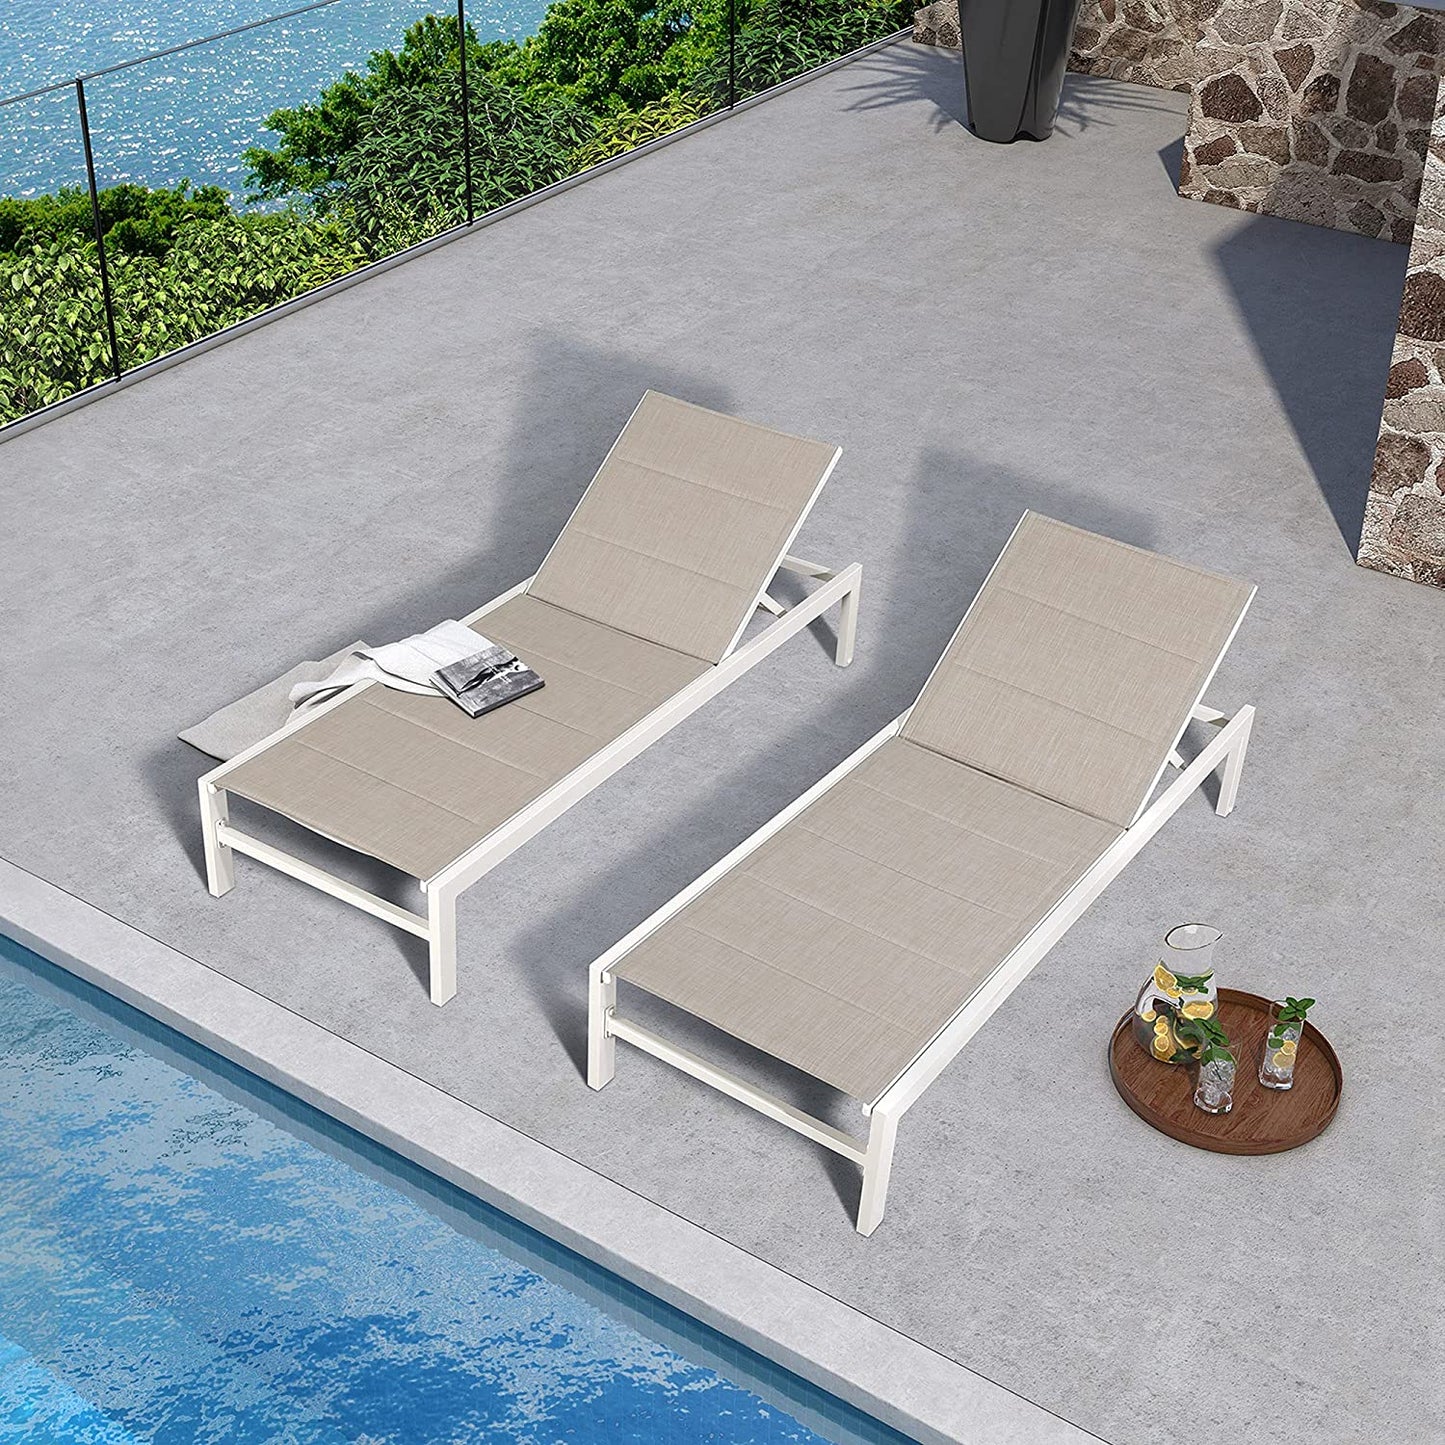 Patio Outdoor Aluminum Chaie Lounge Chair Adjustable Recliner with Wheels and Quick Dry Foam (Set of 2, Beige)